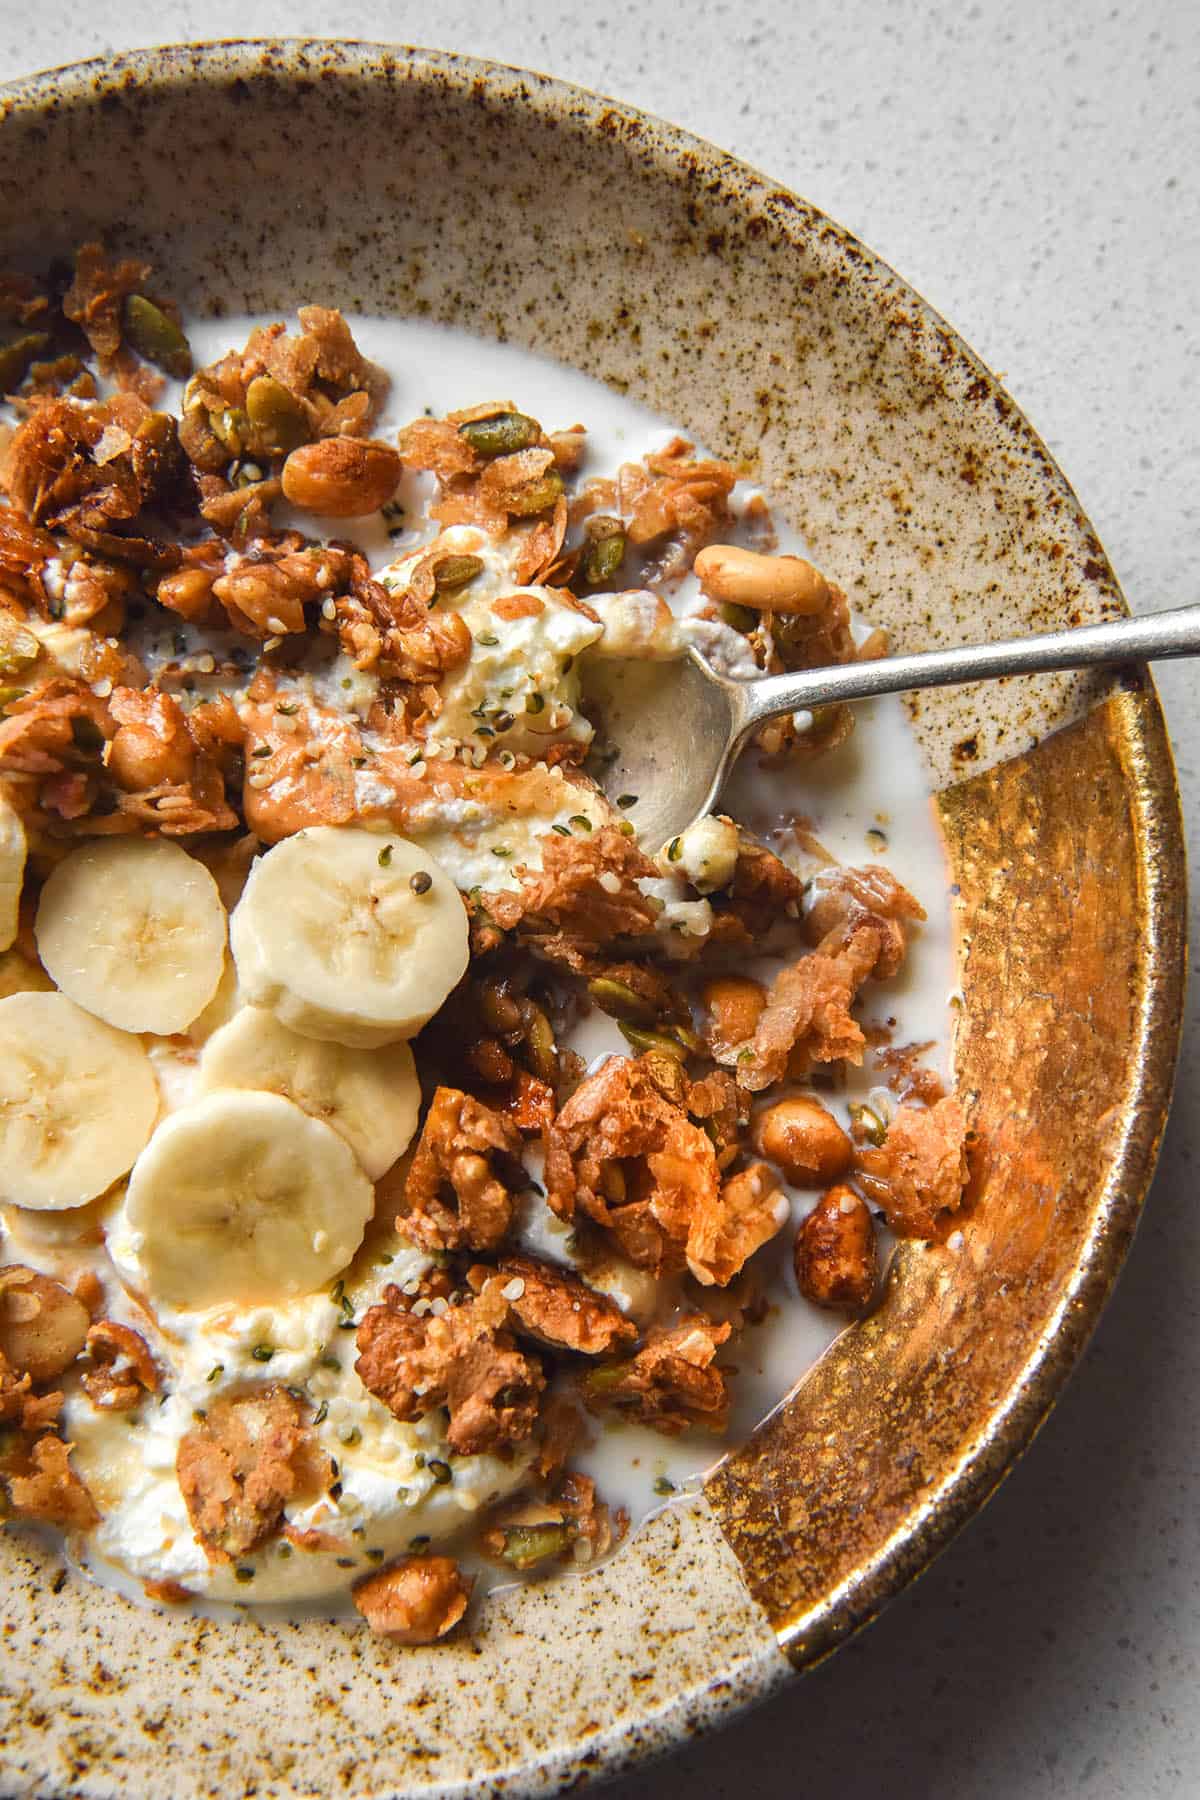 An aerial image of a bowl of low FODMAP granola with milk, bananas and yoghurt on a white marble table